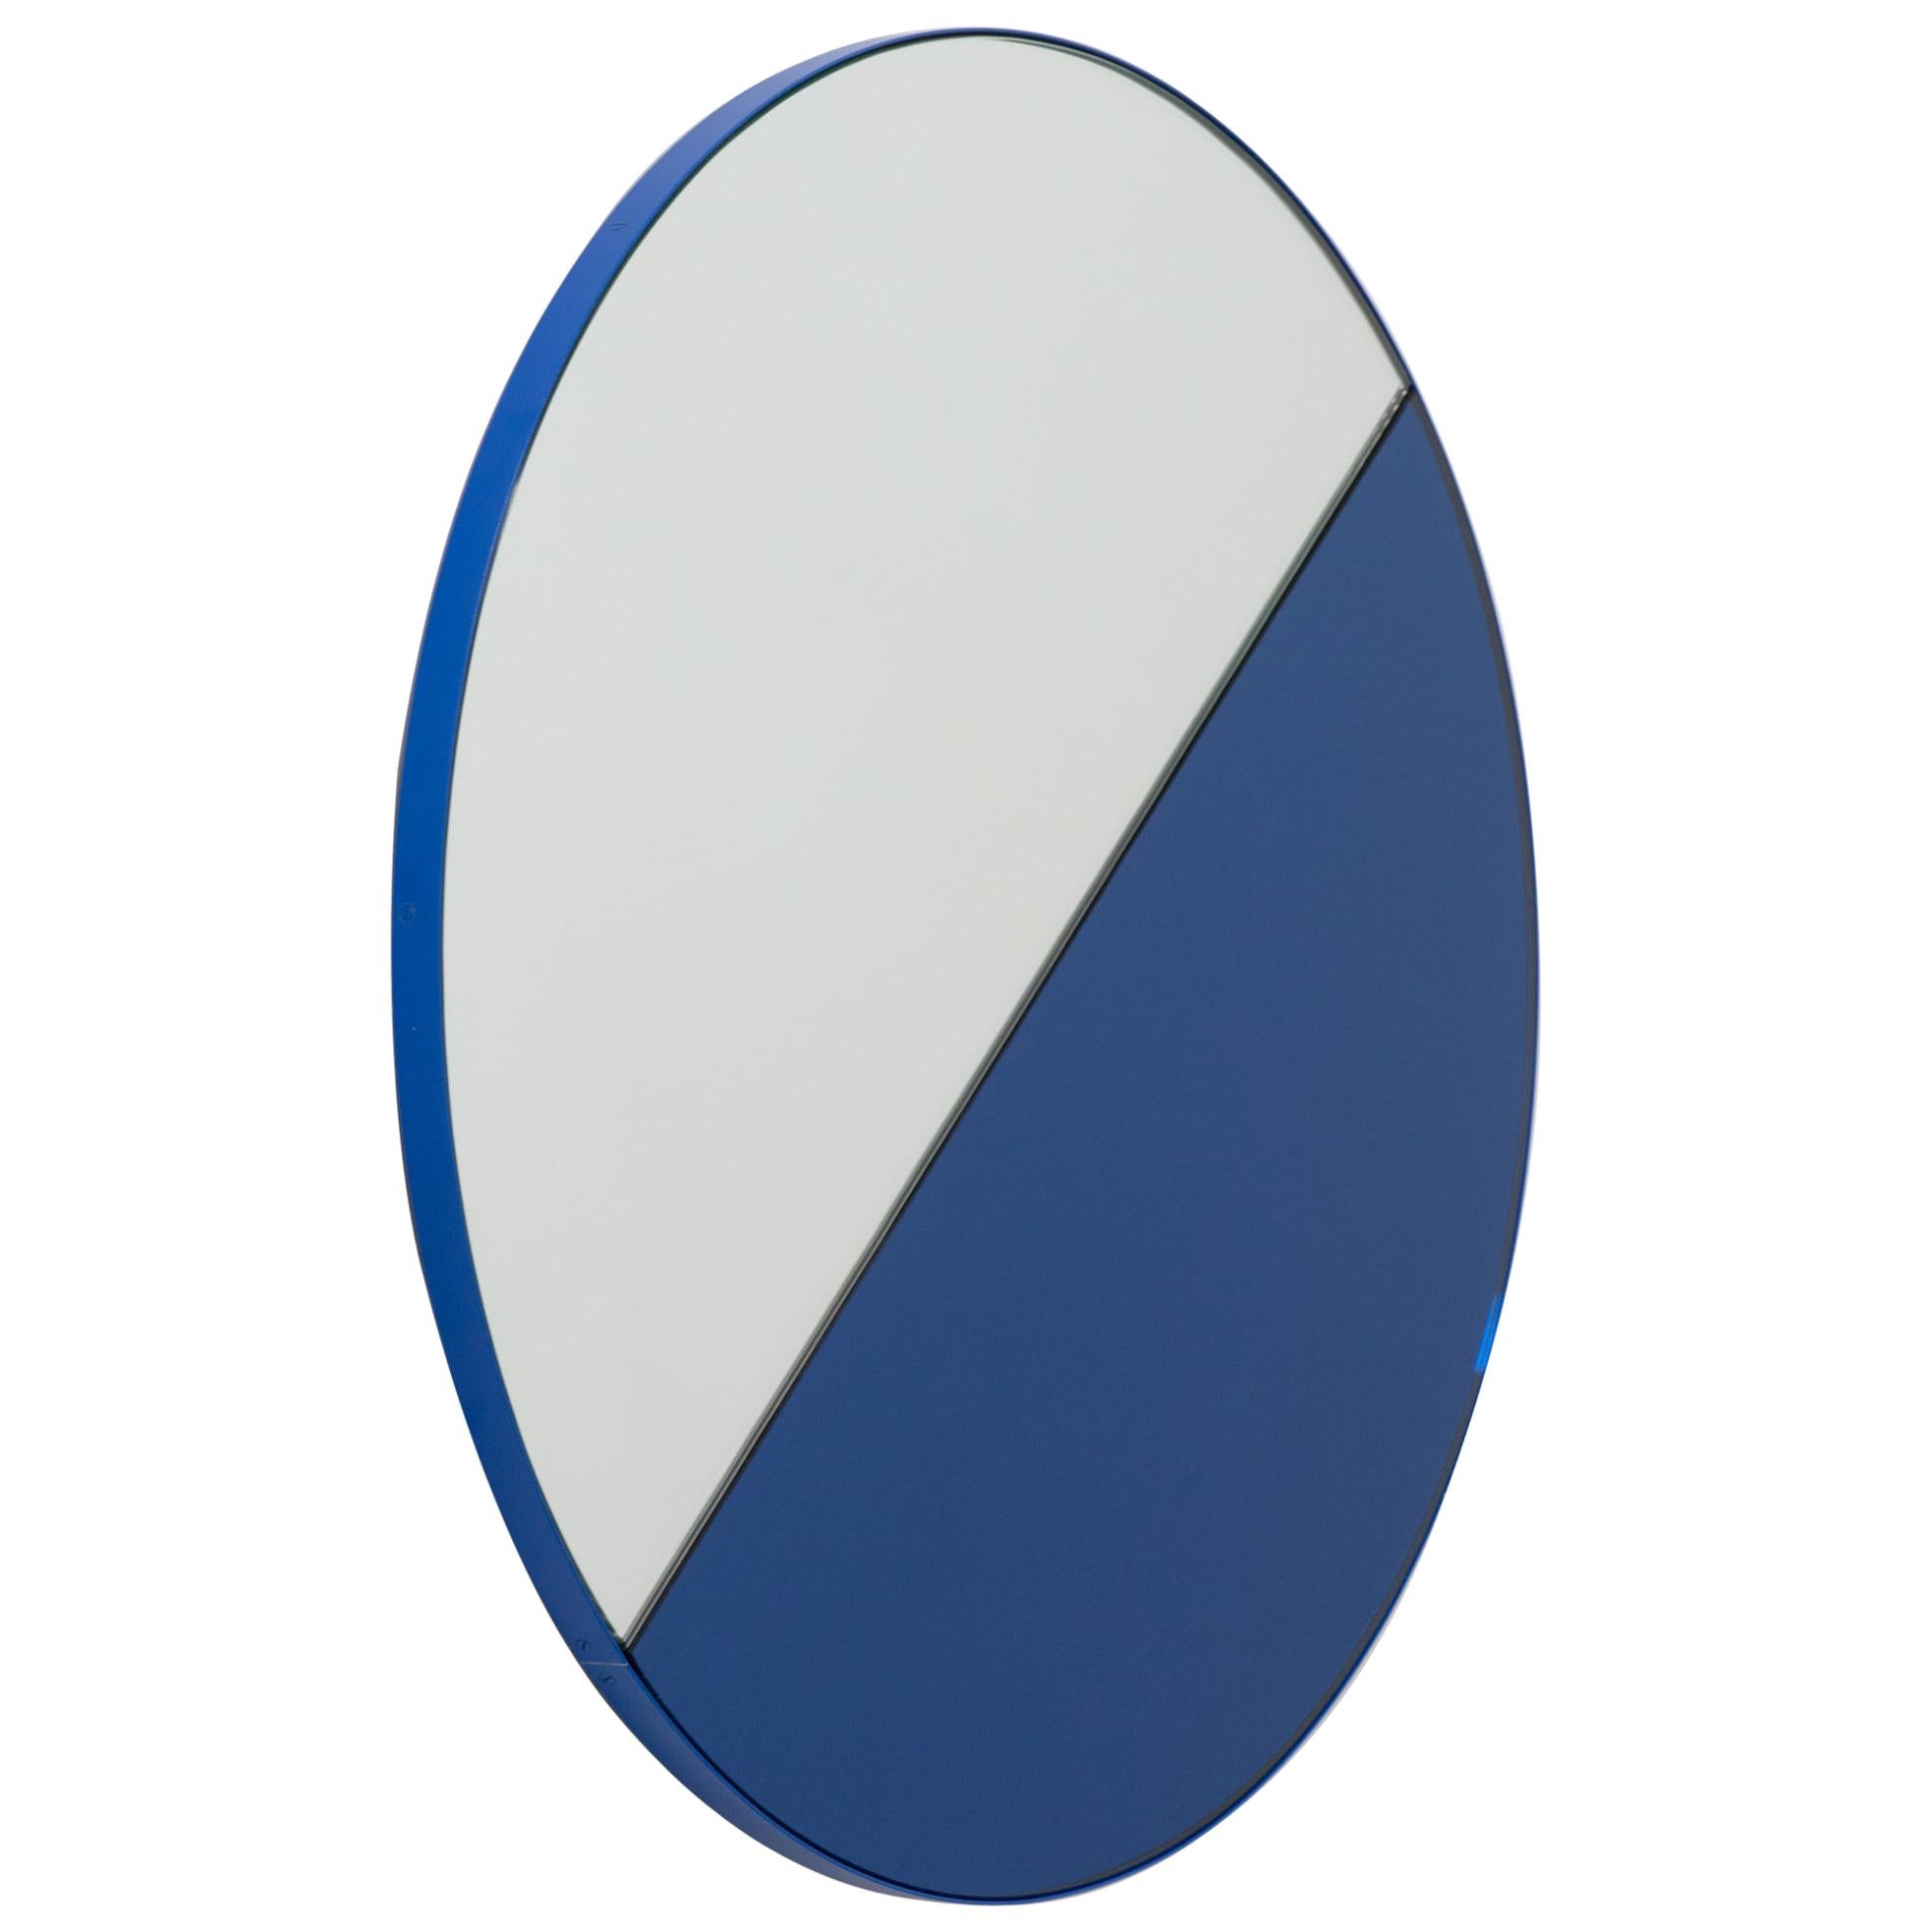 Orbis Dualis Mixed Blue Tinted Contemporary Round Mirror with Blue Frame, Small